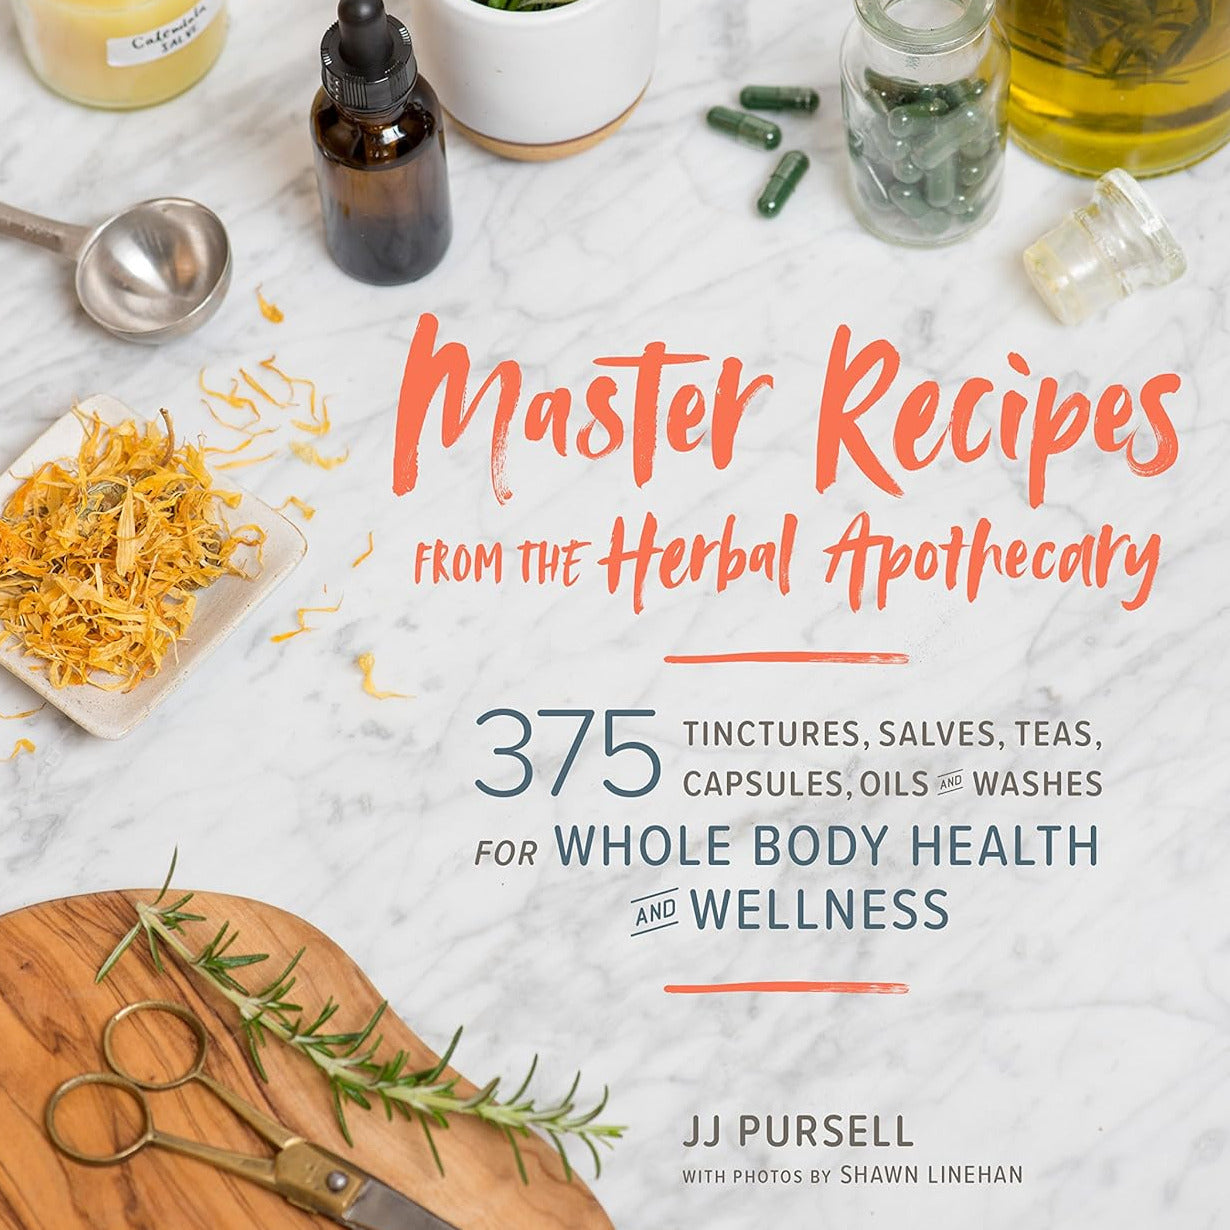 Master Recipes from the Herbal Apothecary